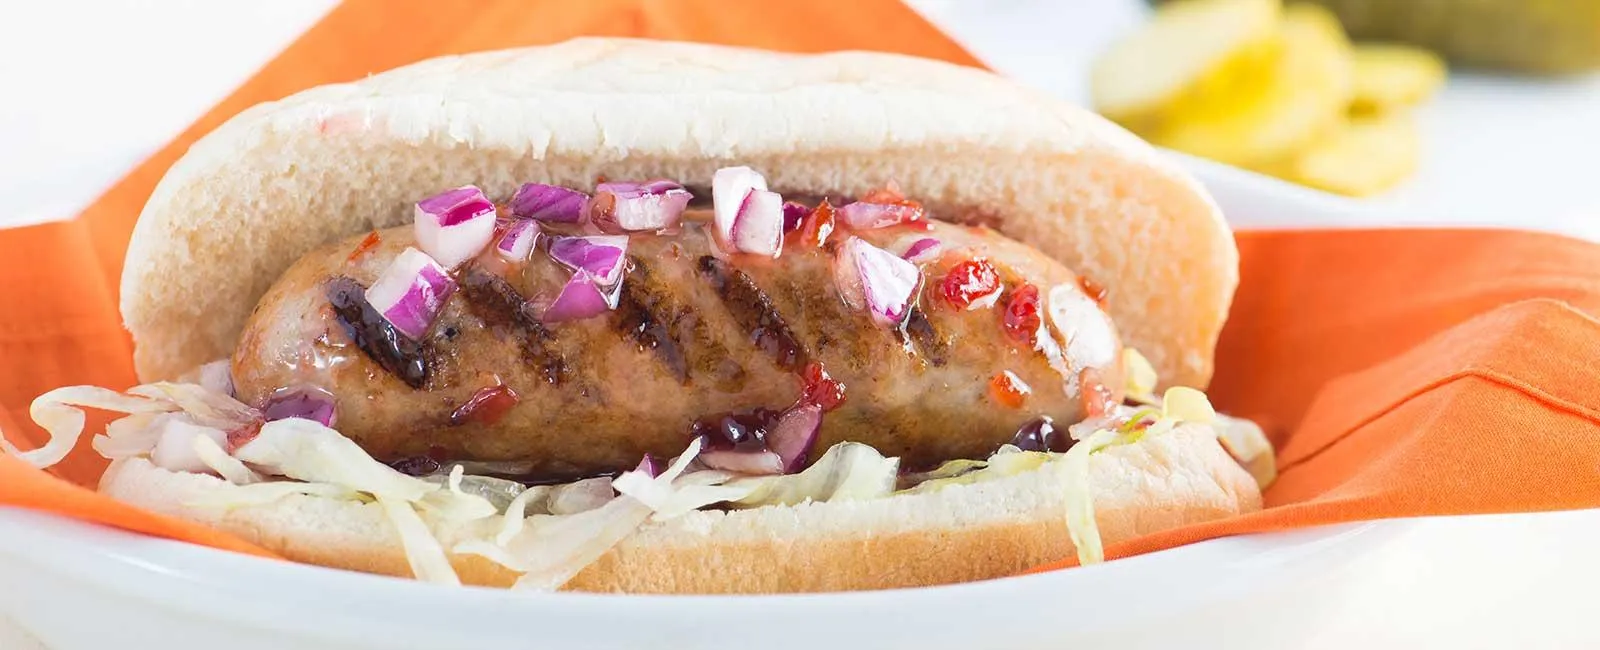 Grilled Sausages with Sweet Chili Sauce 